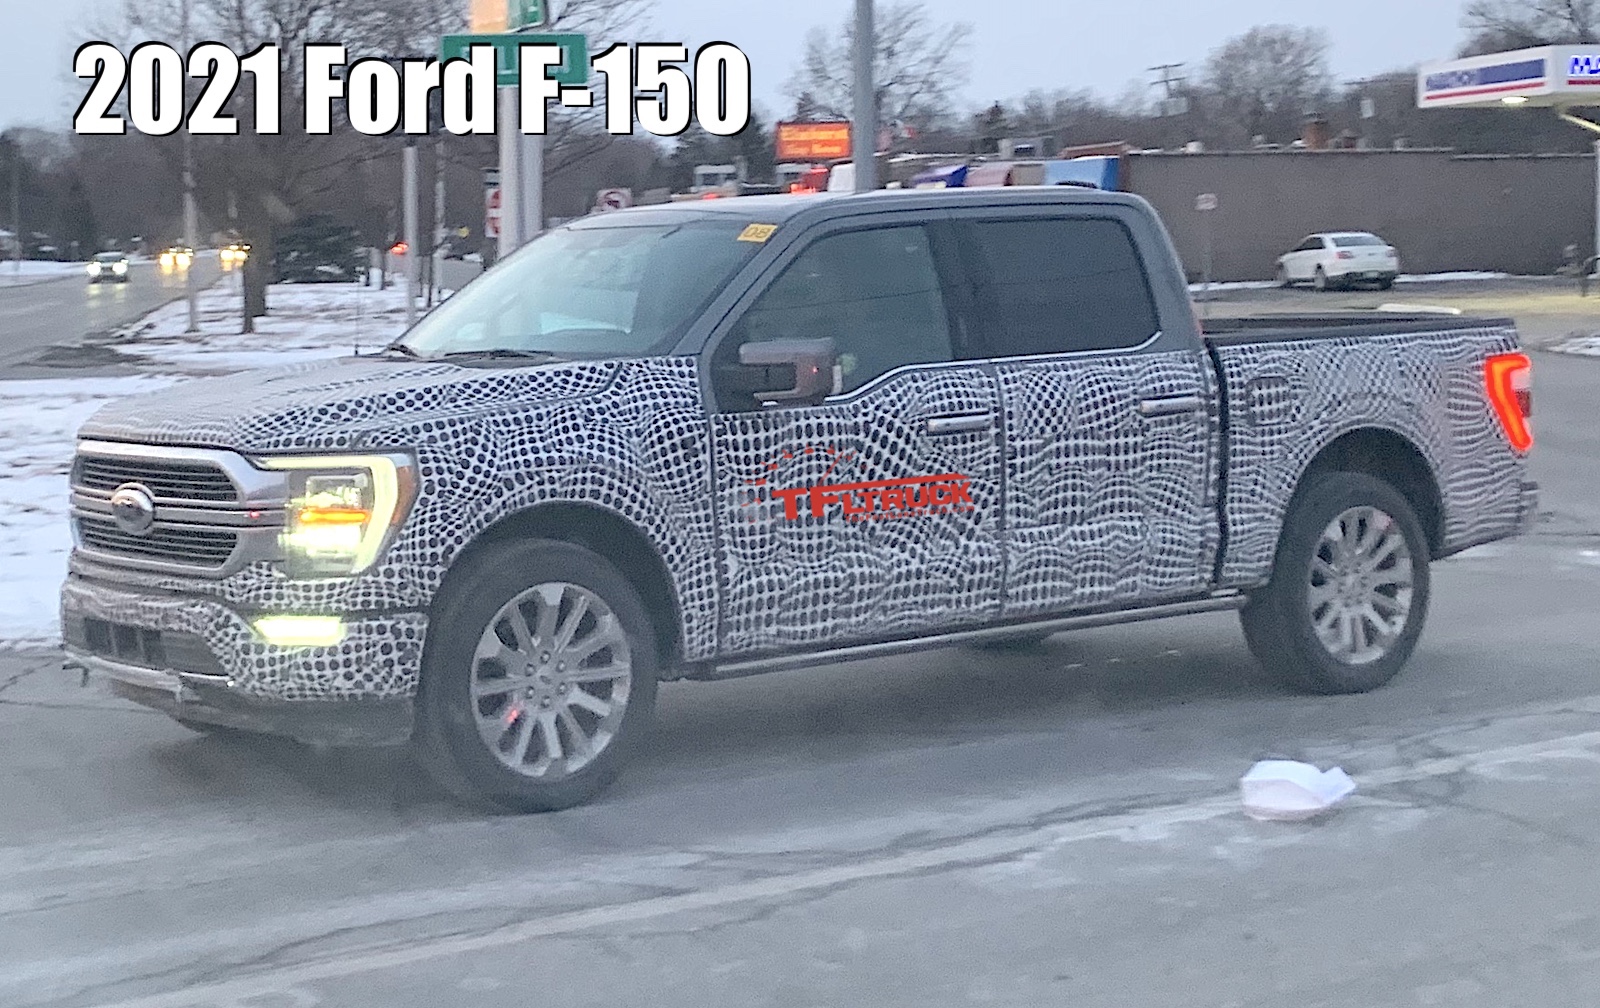 2021 Ford F 150 Prototype Caught Testing With All Led Lights Blaring Is This A Hybrid Spied In The Wild The Fast Lane Truck